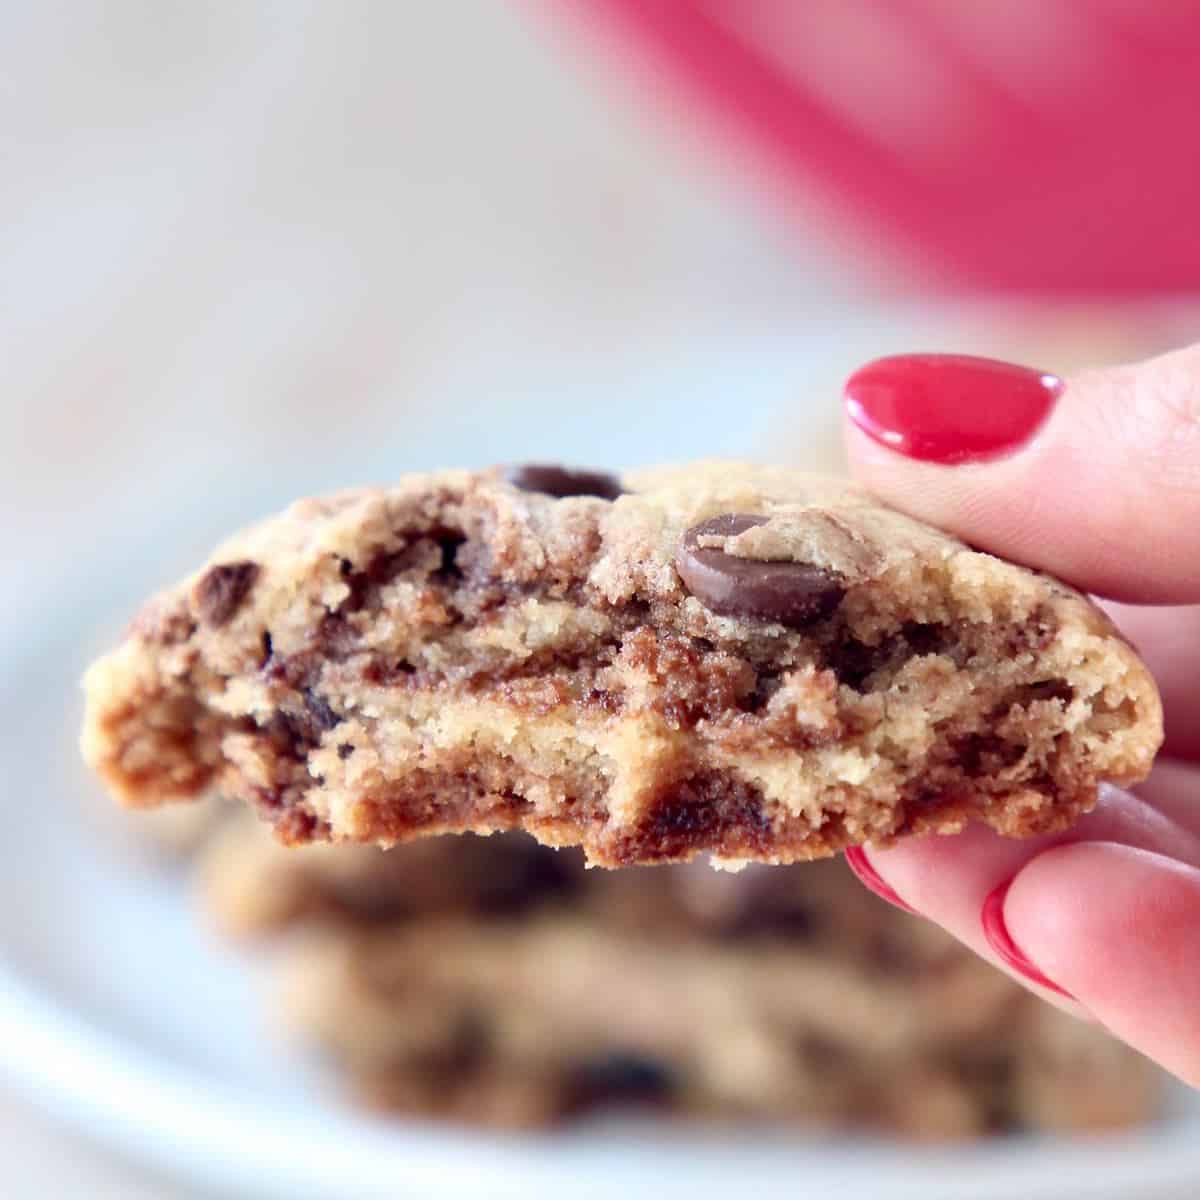 Hand holding half of a nutella chocolate chip cookie